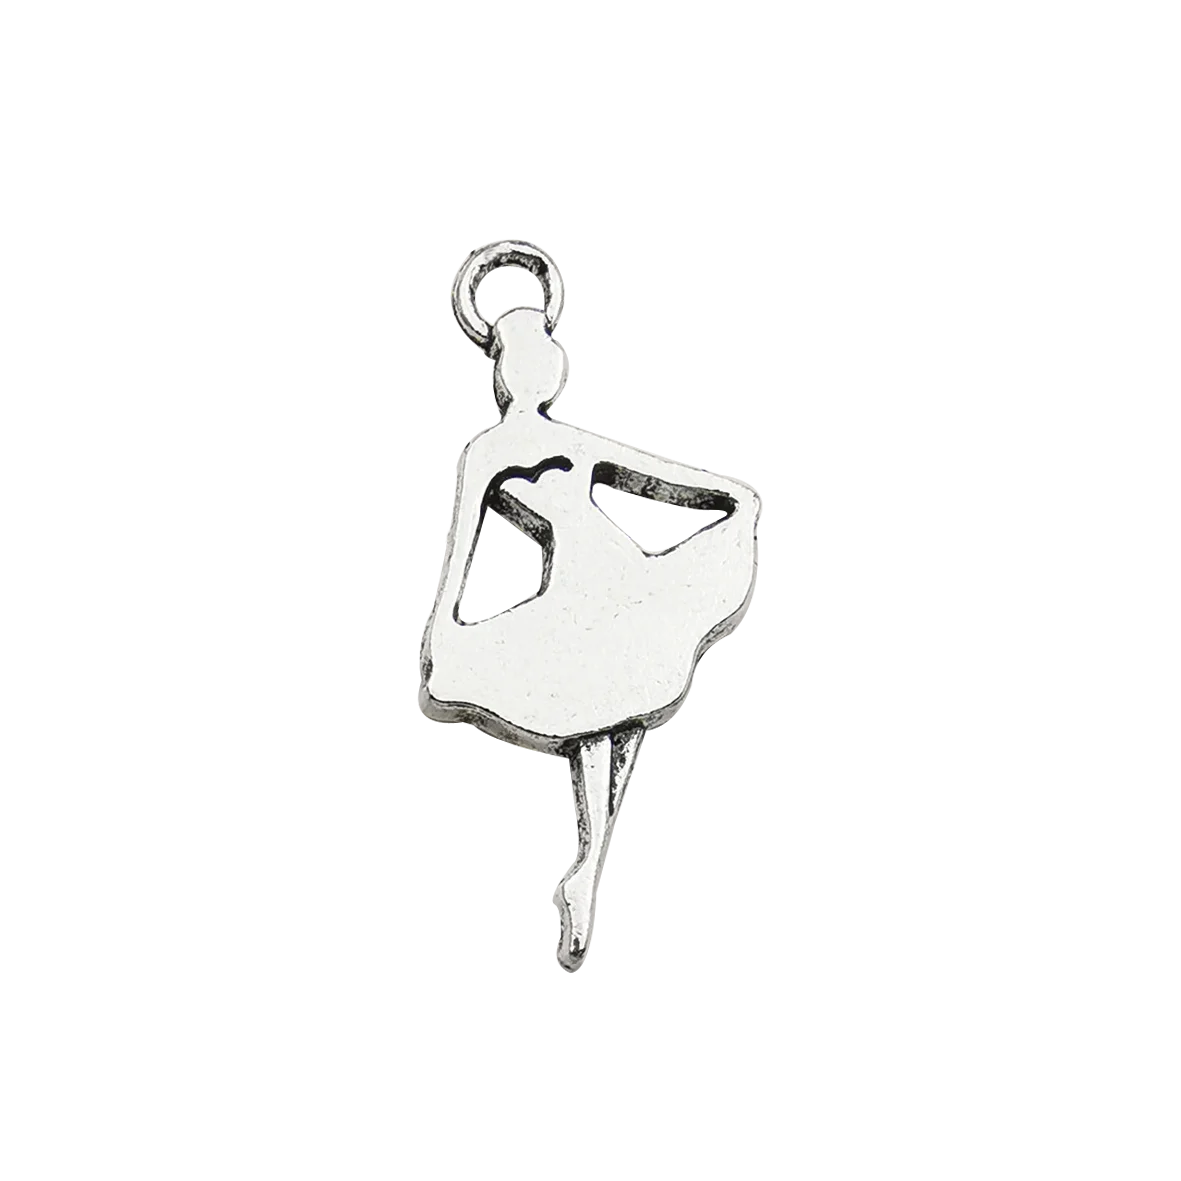 60pcs Antique Silver Ballerina Ballet Dancer Charms For Diy Necklace Bracelet Jewelry Making M290 Charms Aliexpress